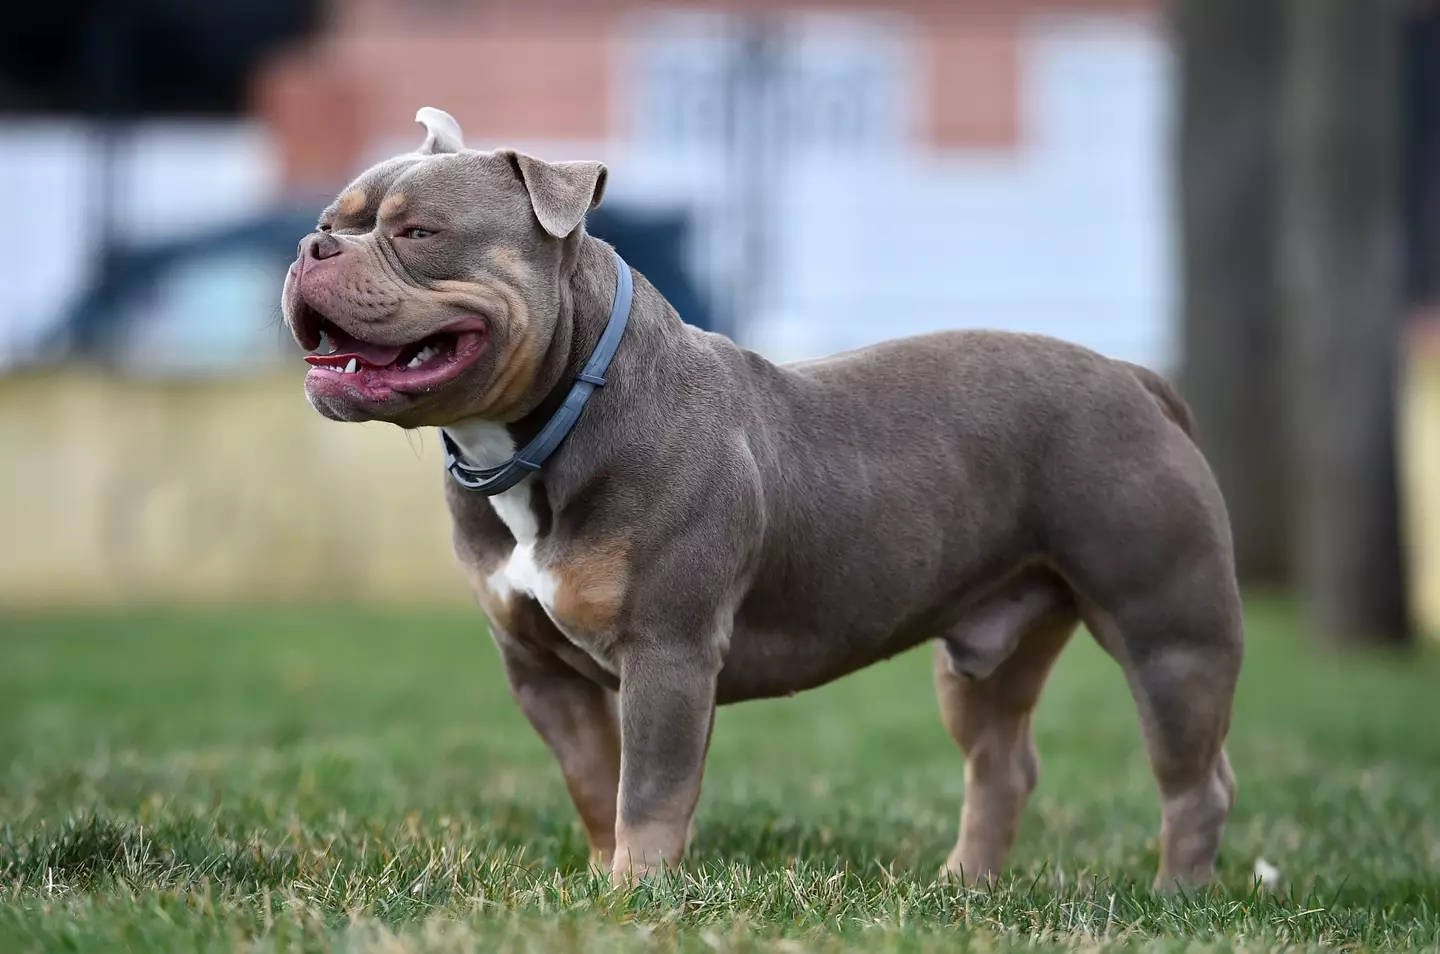 People are growing concerned about the XL Bully breed following a number of recent attacks.